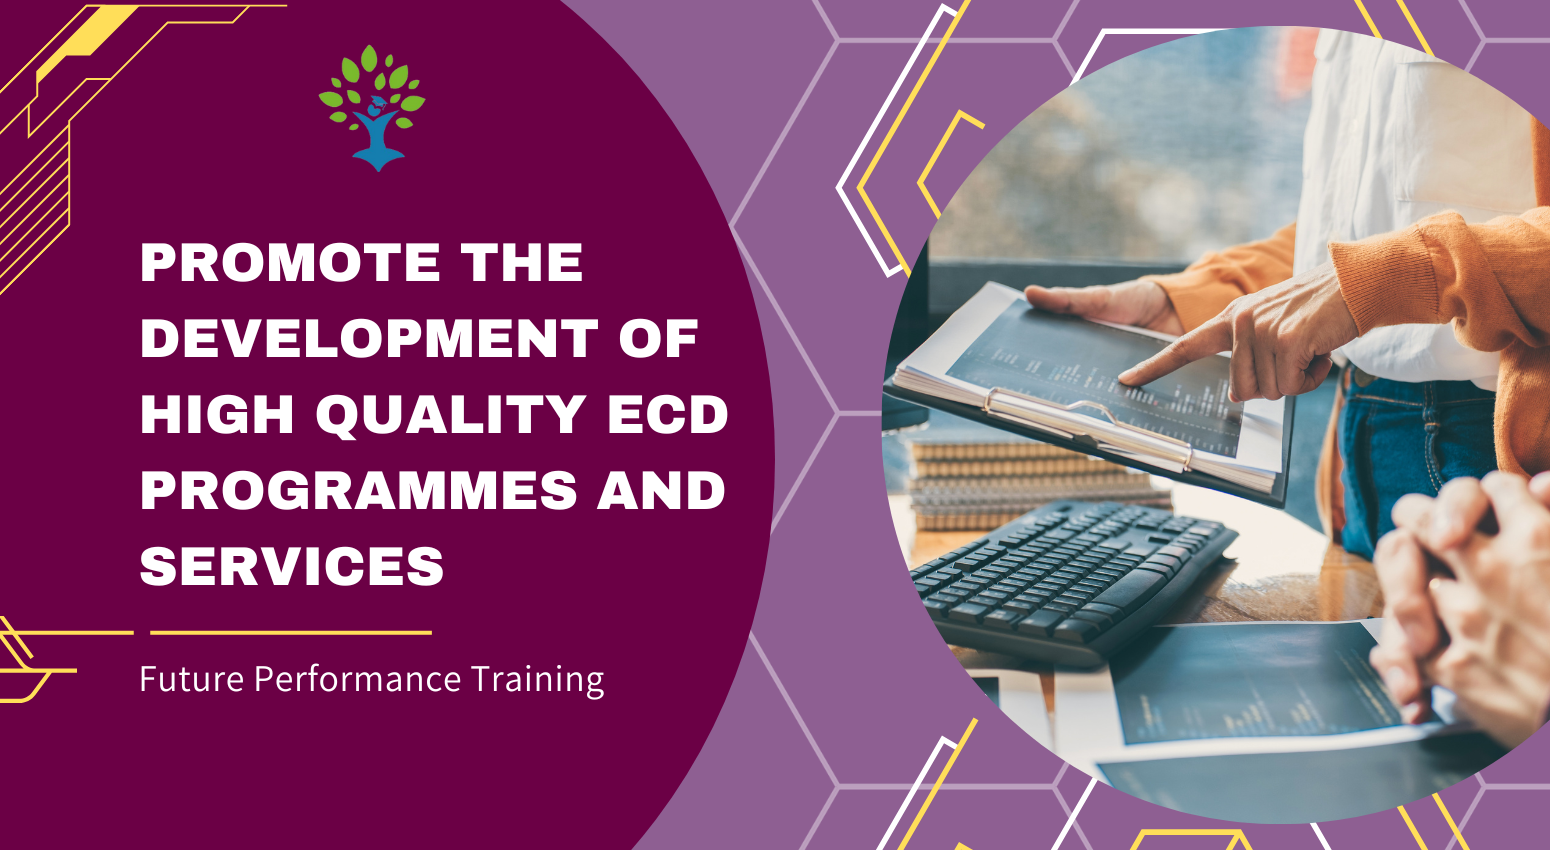 Promote the development of high quality ECD programmes and services